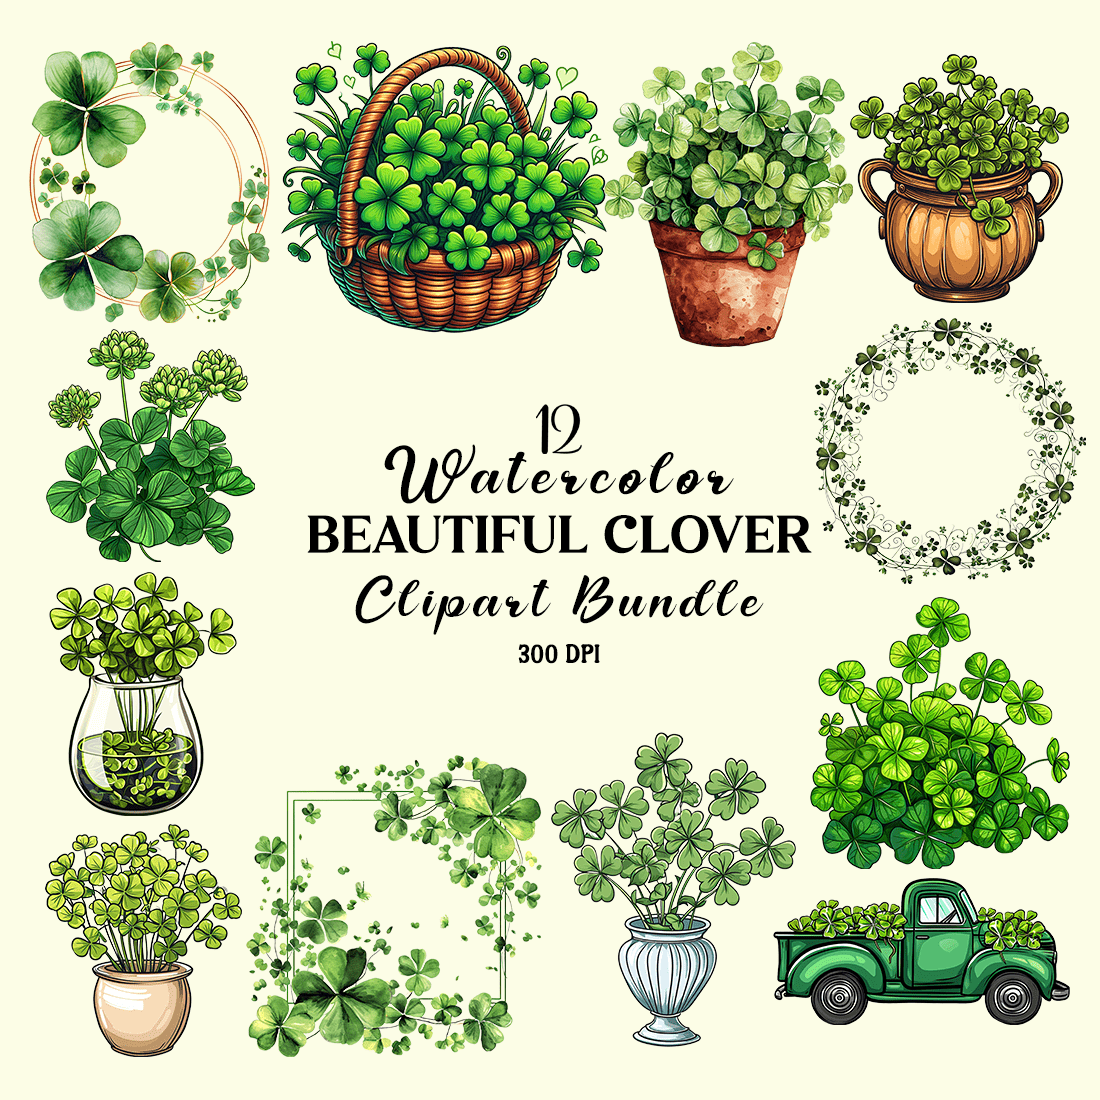 Watercolor Beautiful Clover Clipart Bundle cover image.